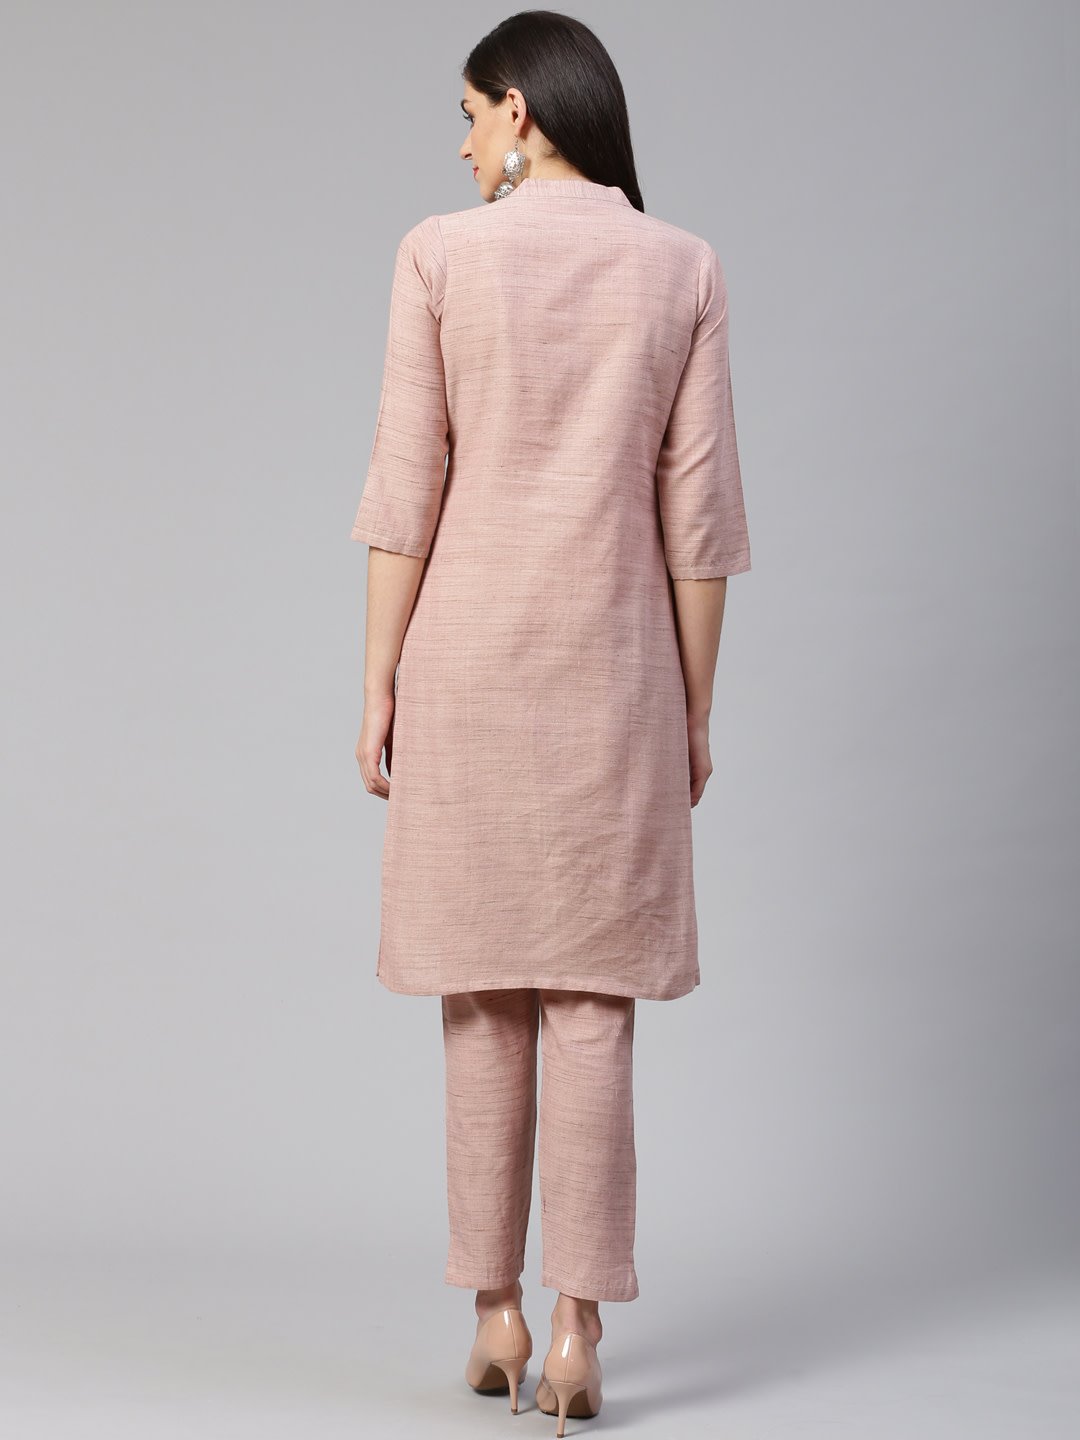 Women's Pink Woven Design Kurta with Trousers - Final Clearance Sale